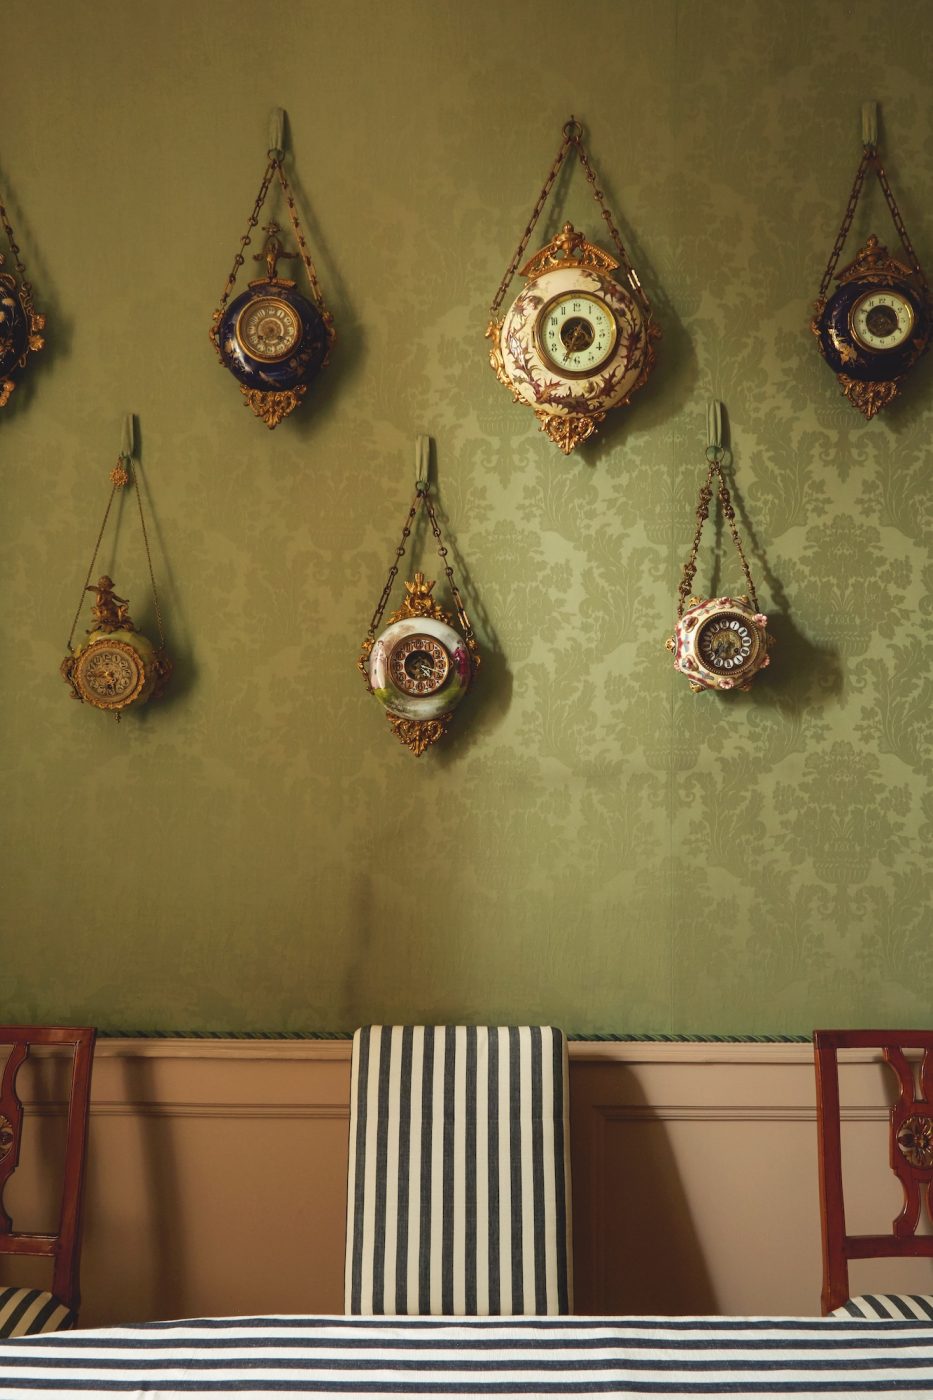 A photo of ornate clocks on top of green wallpaper